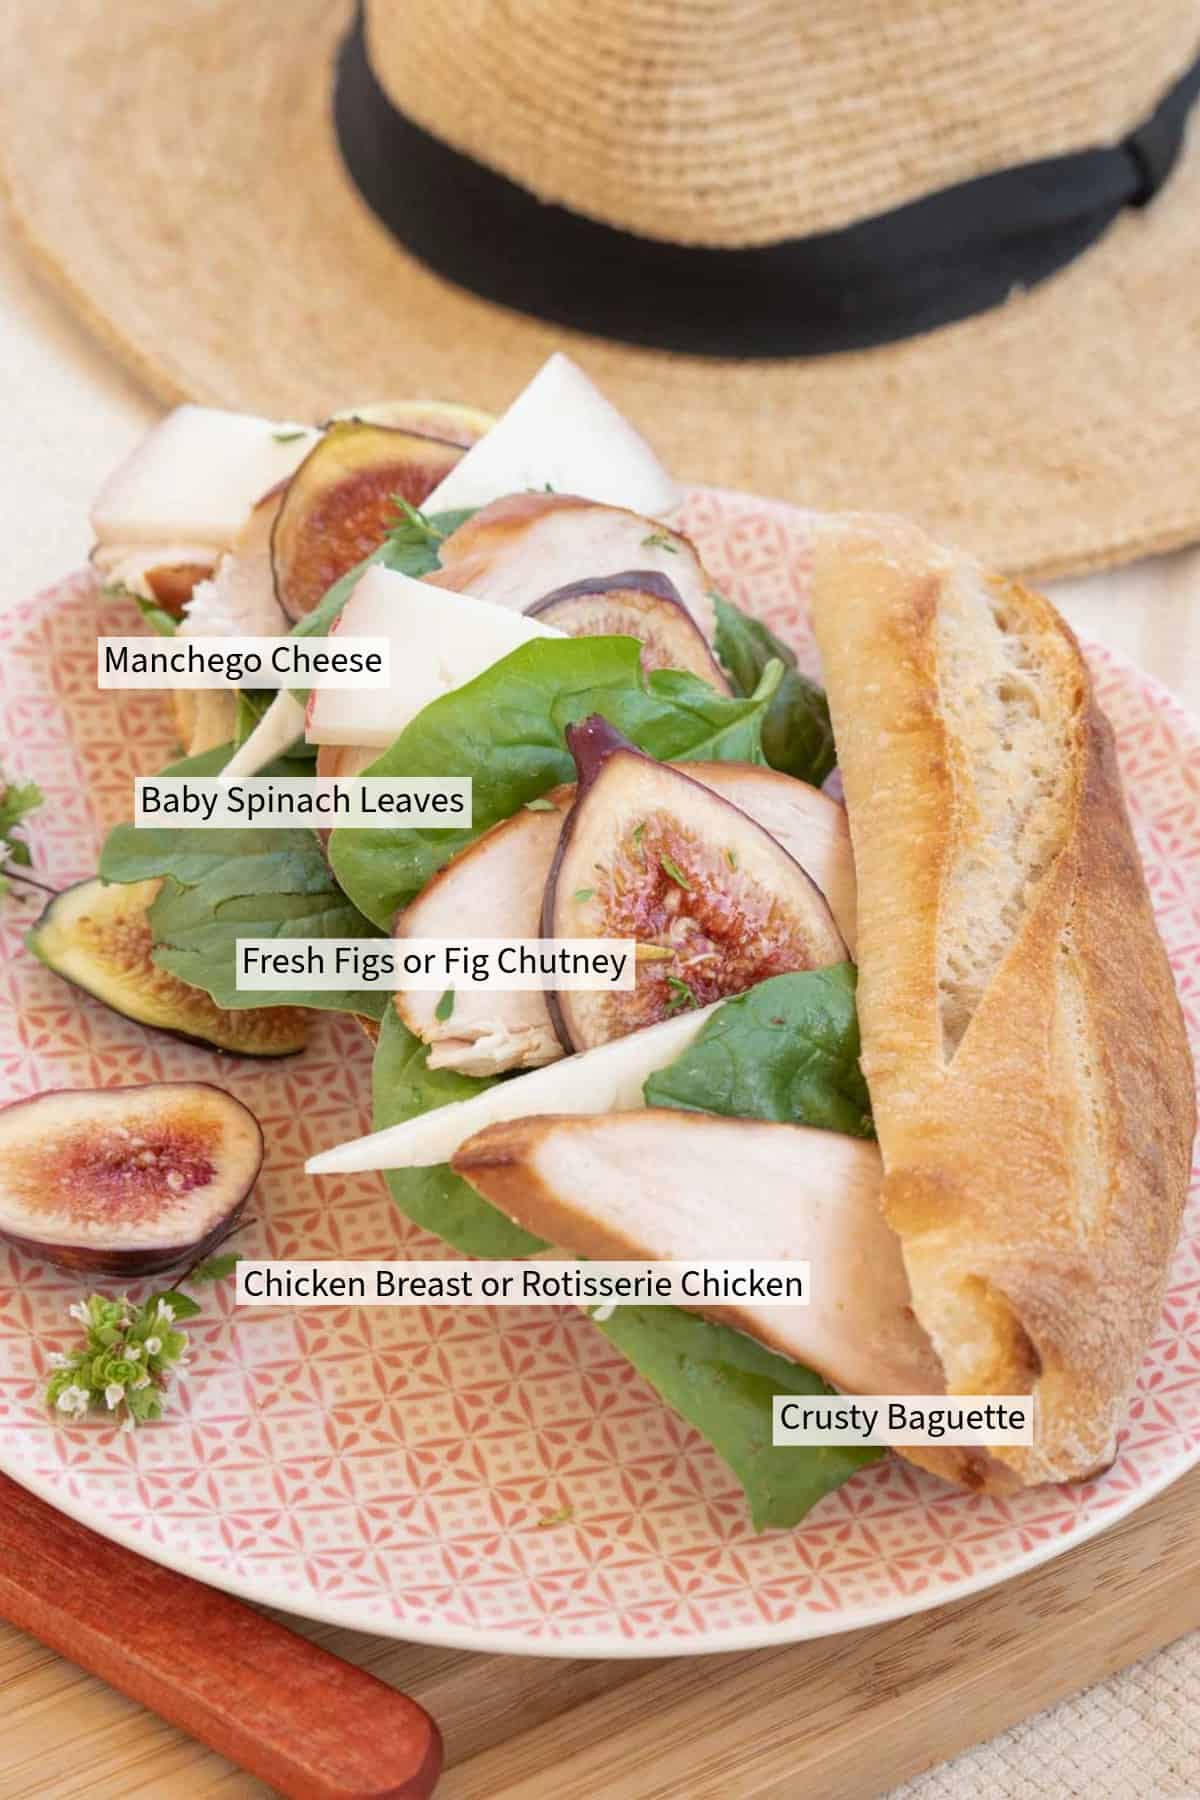 A sandwich with chicken and figs on a plate with a straw hat.